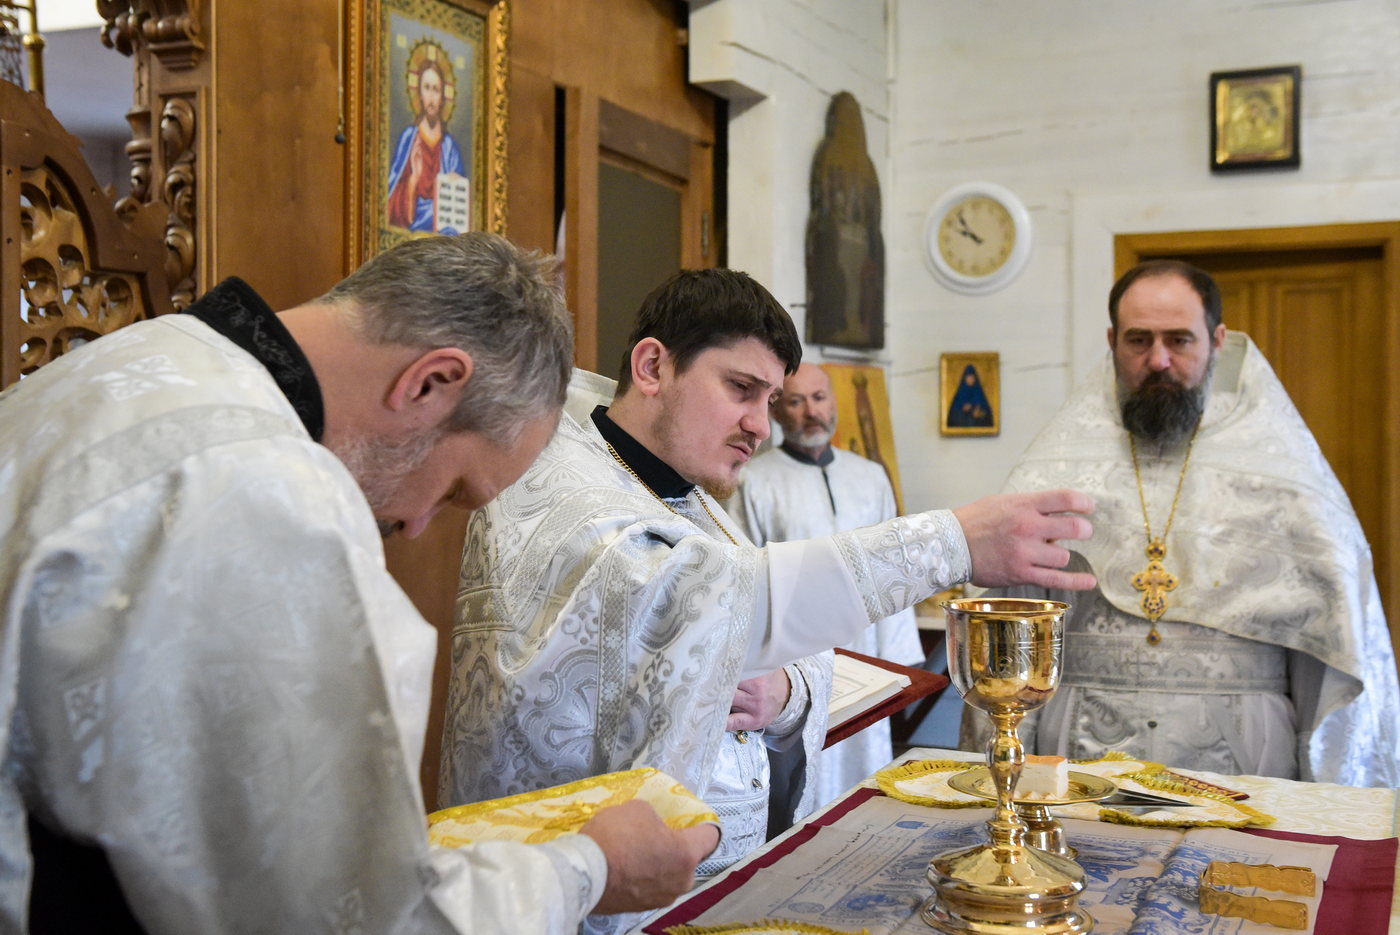 feast of the baptism of the lord at zhulyany 0119